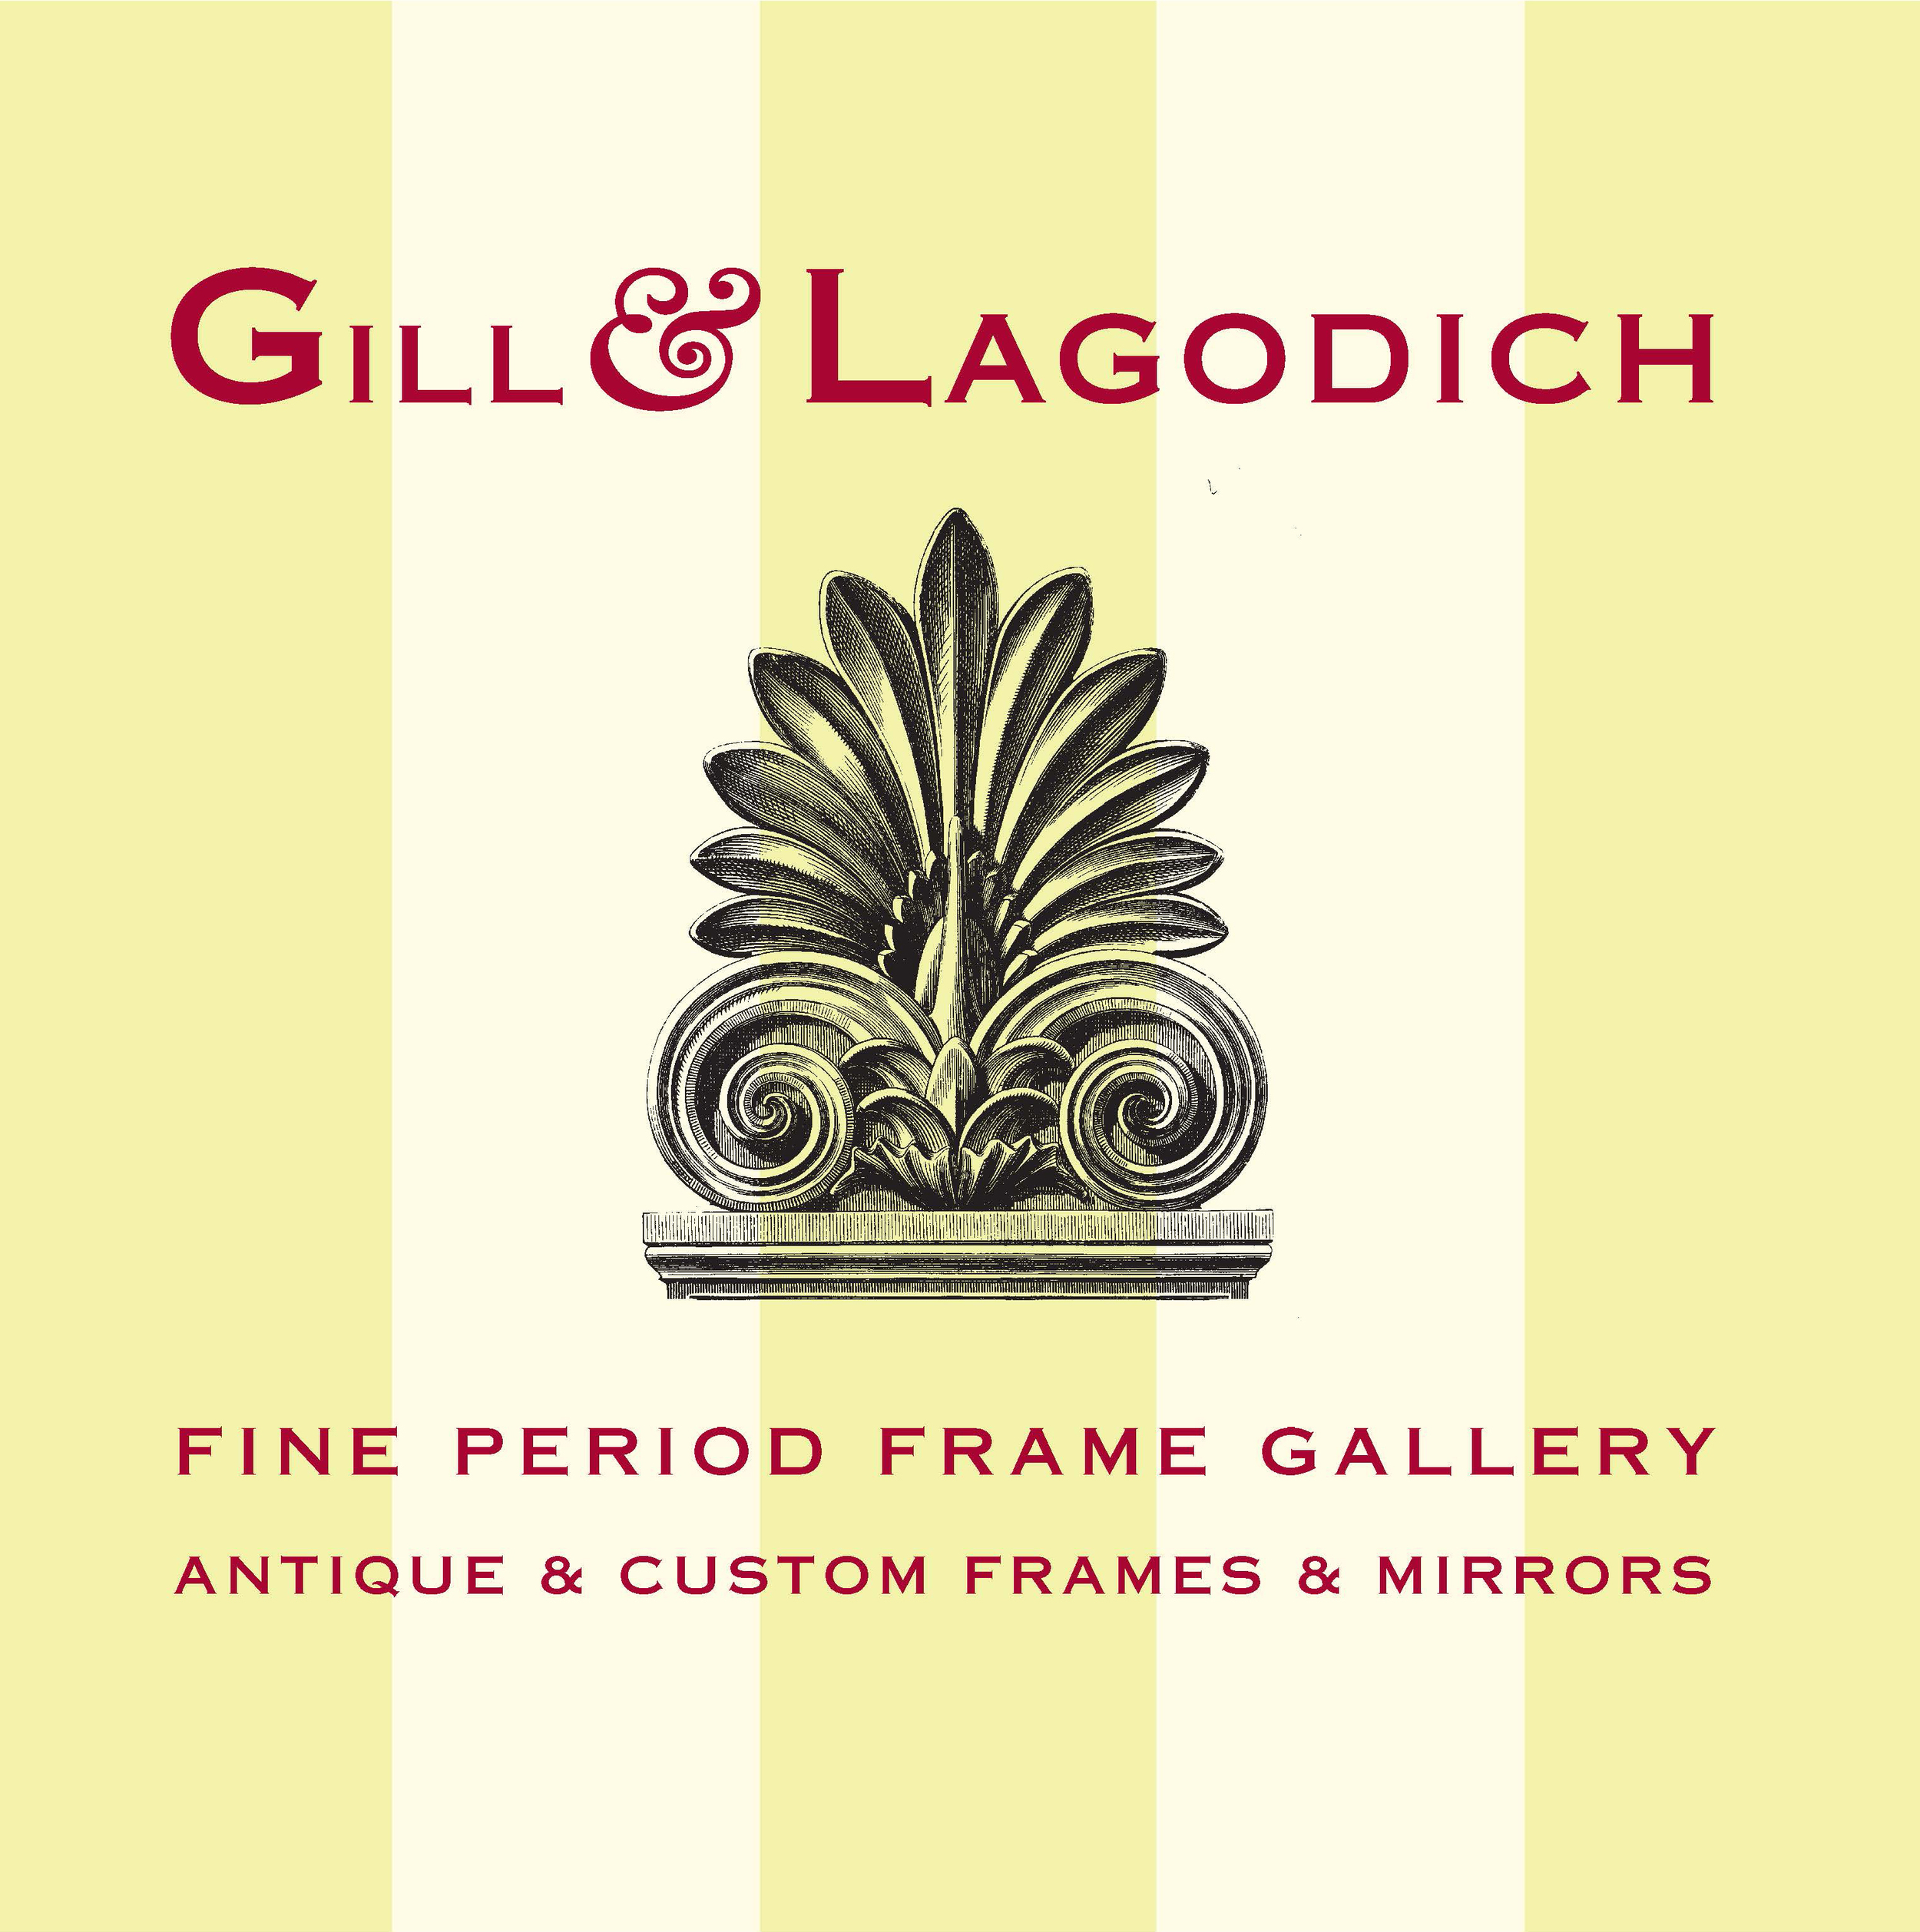 SELECTED PAST PROJECTS — Gill & Lagodich Gallery